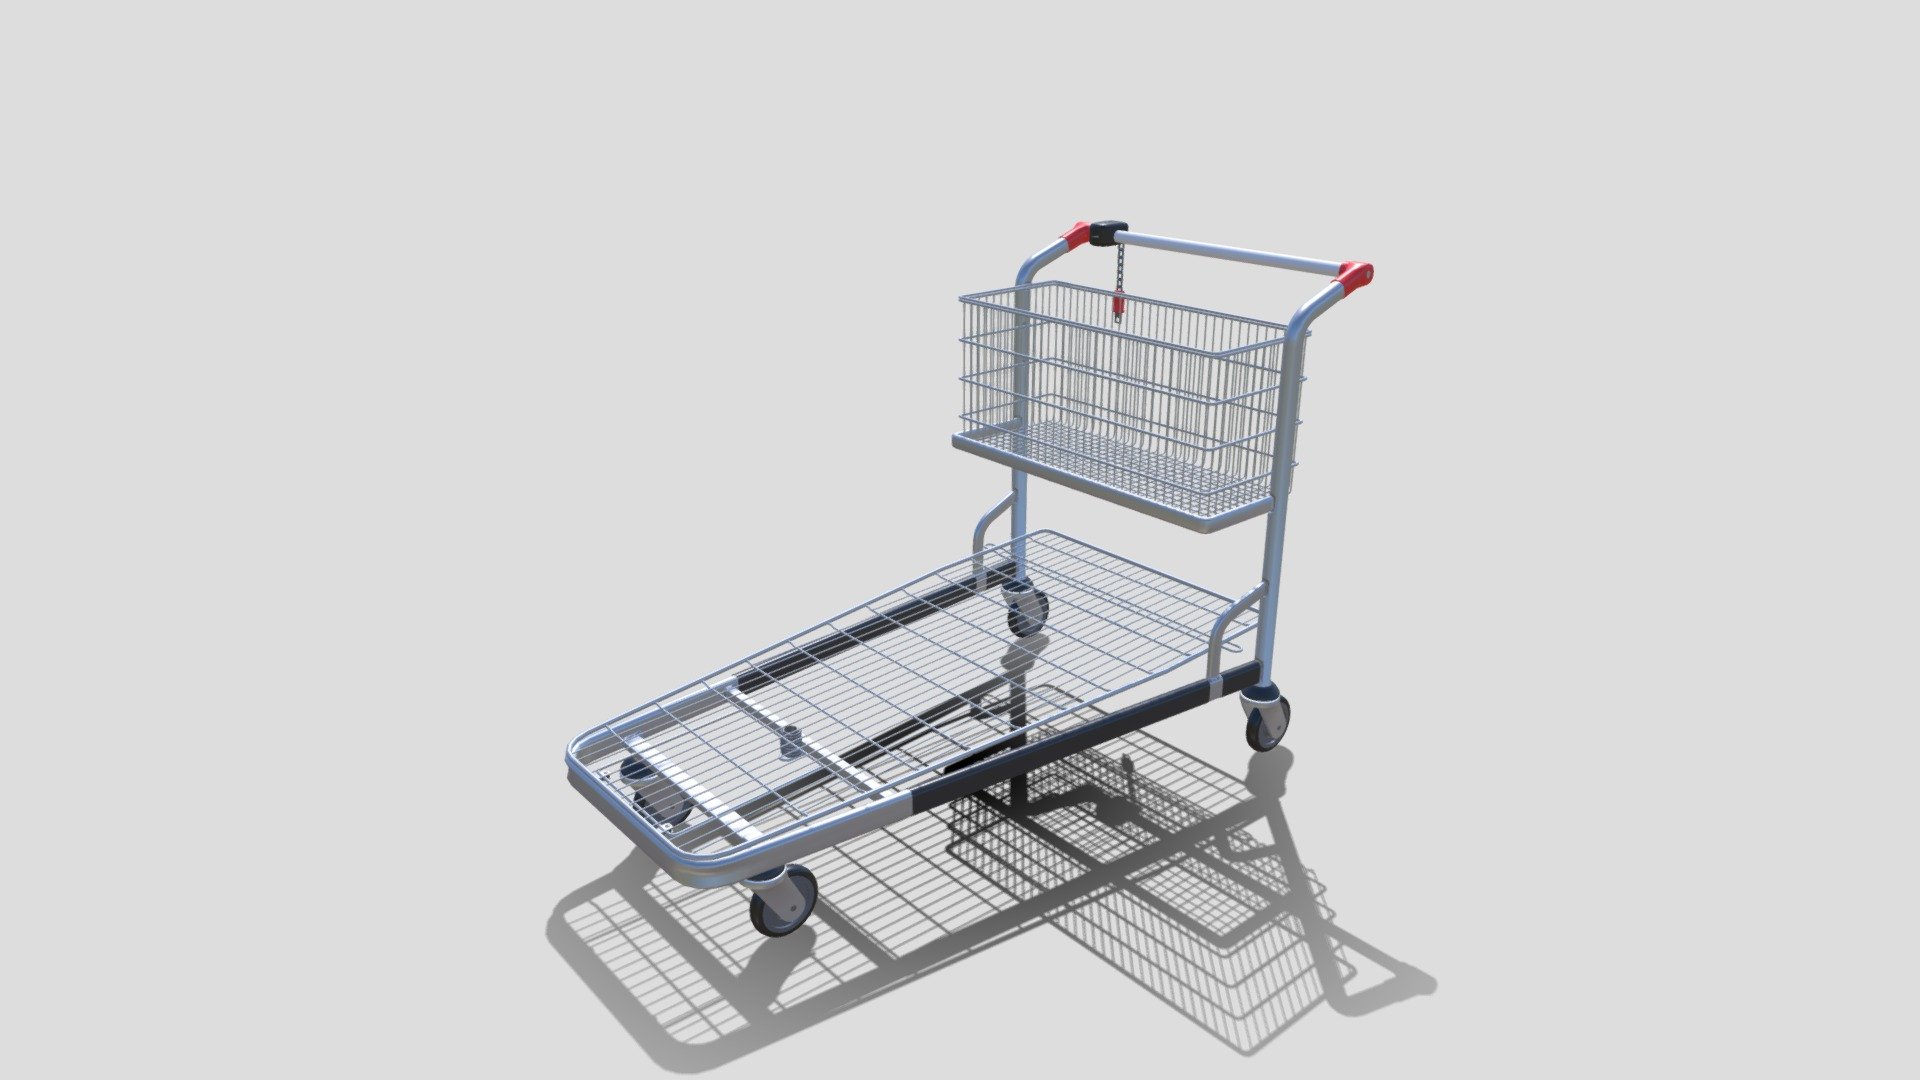 Shopping cart 3d model rendered with Cycles in Blender, as per seen on attached images. 
The model is scaled to real-life scale.

File formats:
-.blend, rendered with cycles, as seen in the images;
-.obj, with materials applied;
-.dae, with materials applied;
-.fbx, with material slots applied;
-.stl;

Files come named appropriately and split by file format.

3D Software:
The 3D model was originally created in Blender 2.8 and rendered with Cycles.

Materials and textures:
PBR material is being used, consisting of five 4k image textures (Base/Disp/Metallic/Normal/Roughness). 
Certain 3d softwares can possibly need texture re-assigning in order to get the proper material effect.

Preview scenes:
The preview images are rendered in Blender using its built-in render engine &lsquo;Cycles'.
Note that the blend files come directly with the rendering scene included and the render command will - Shopping cart v1 - Buy Royalty Free 3D model by dragosburian 3d model